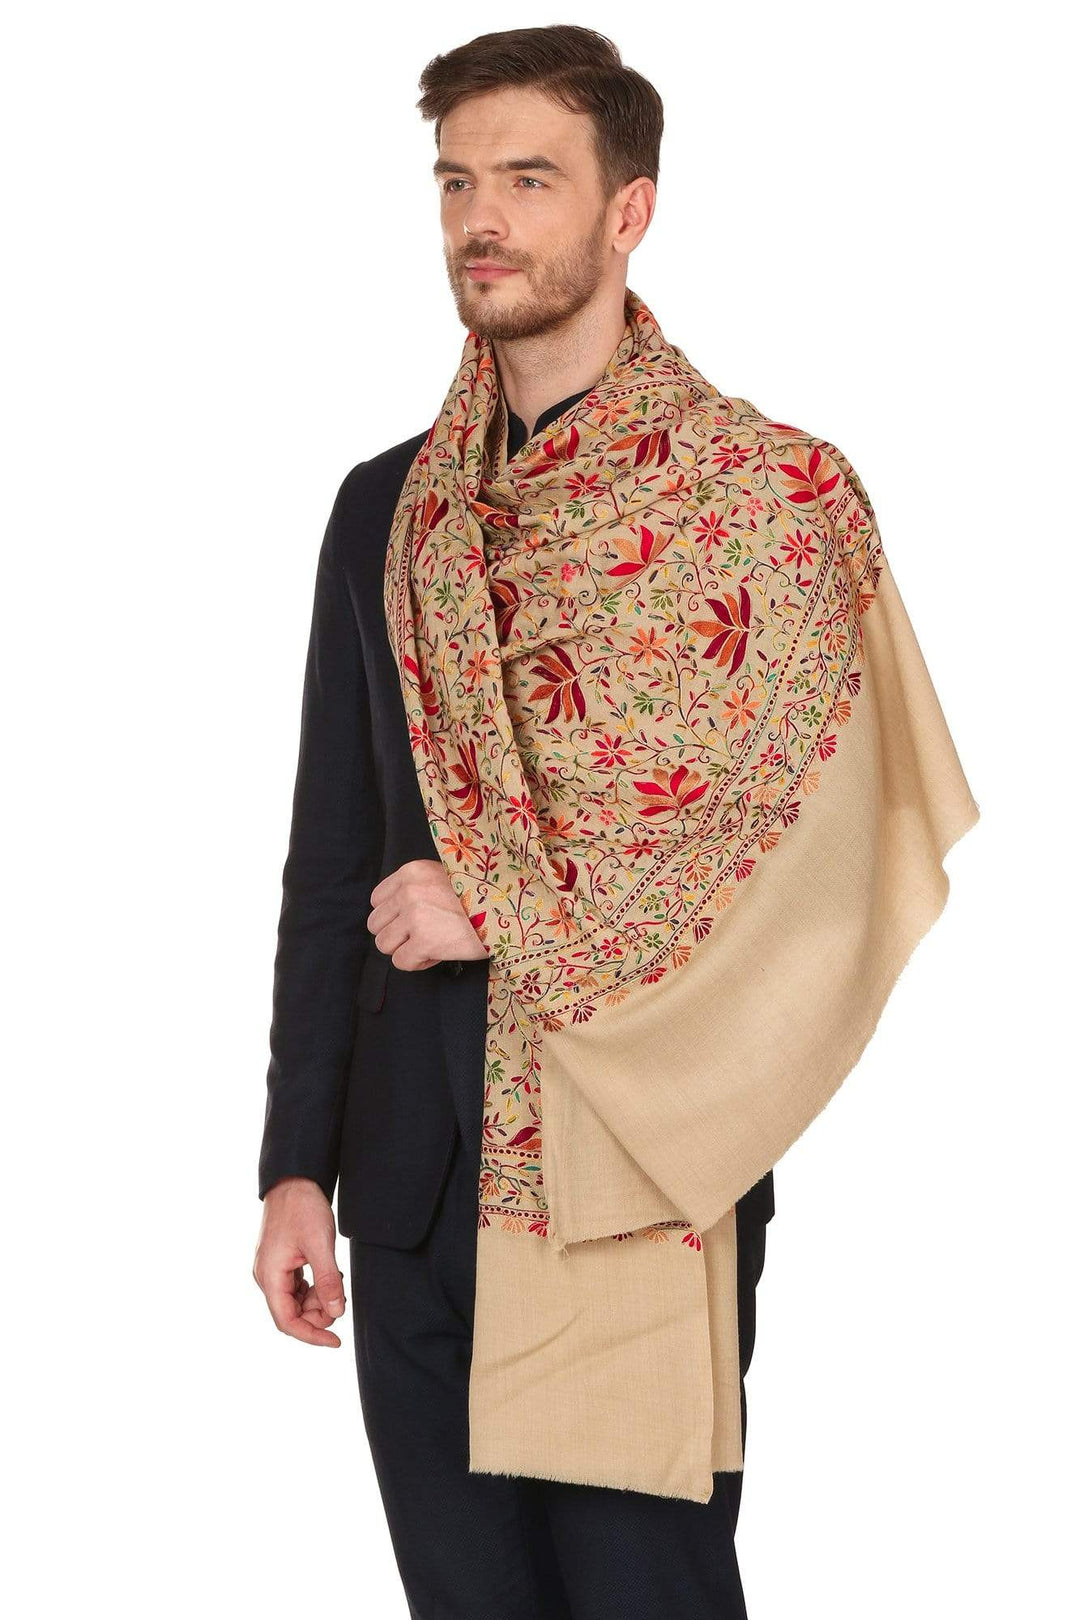 Pashtush Mens Hand Embroidered Stole, Ethnic Wrap, 100% Pure Wool